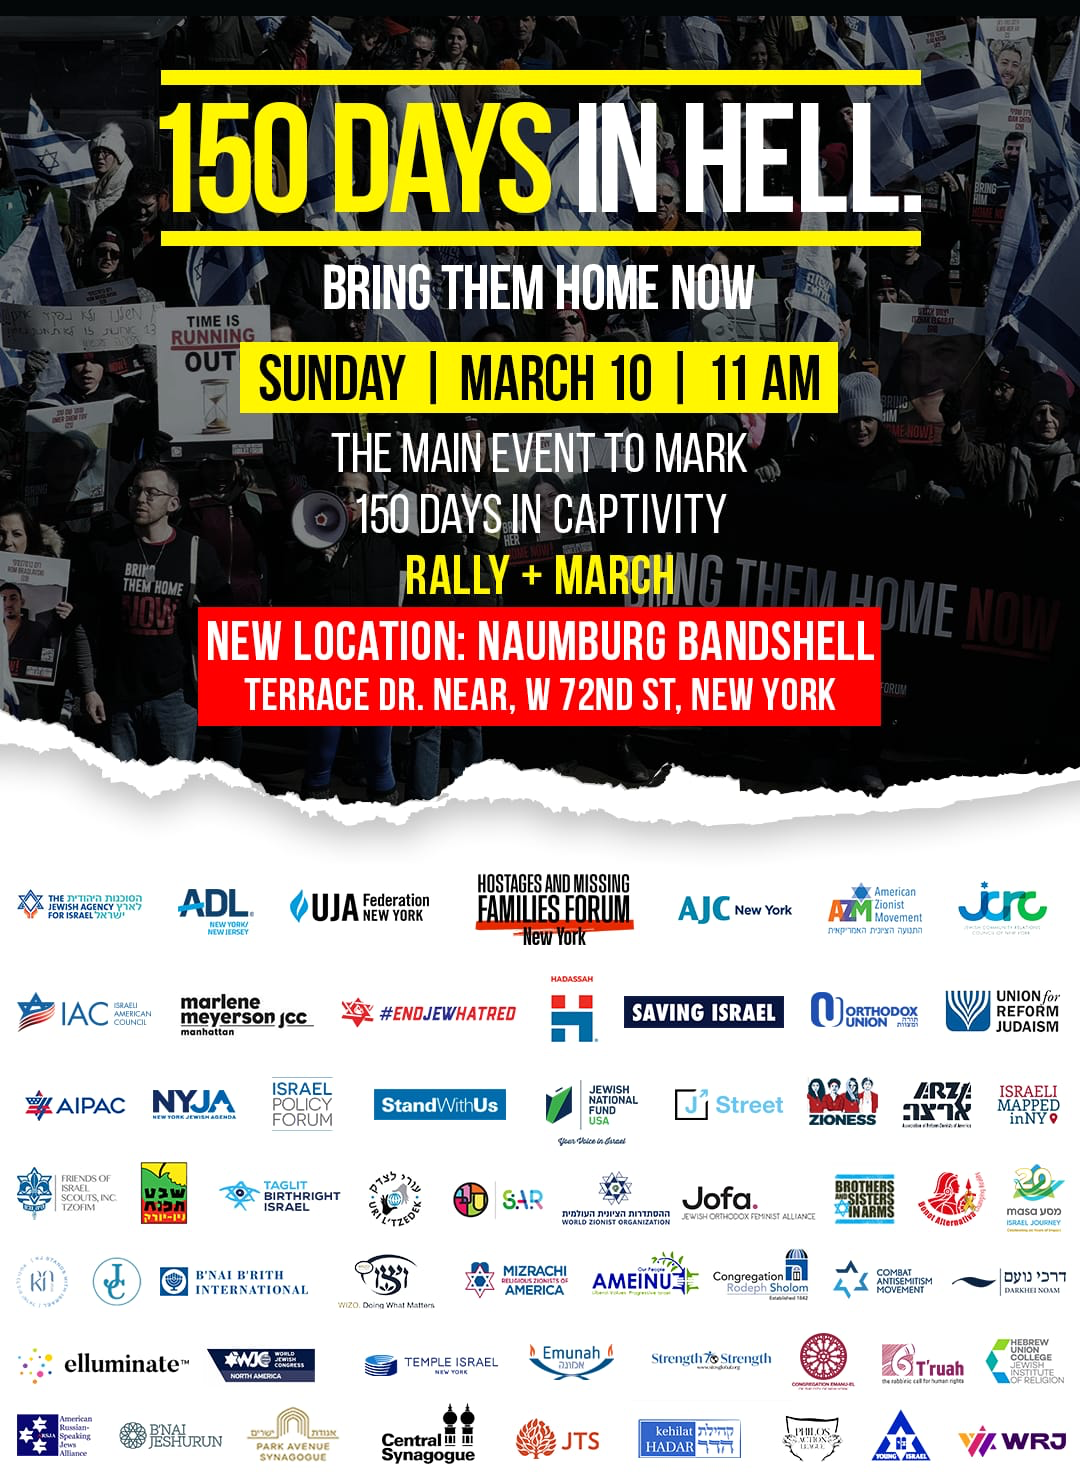 Event poster with new location highlighted: Naumburg Bandshell in Central Park